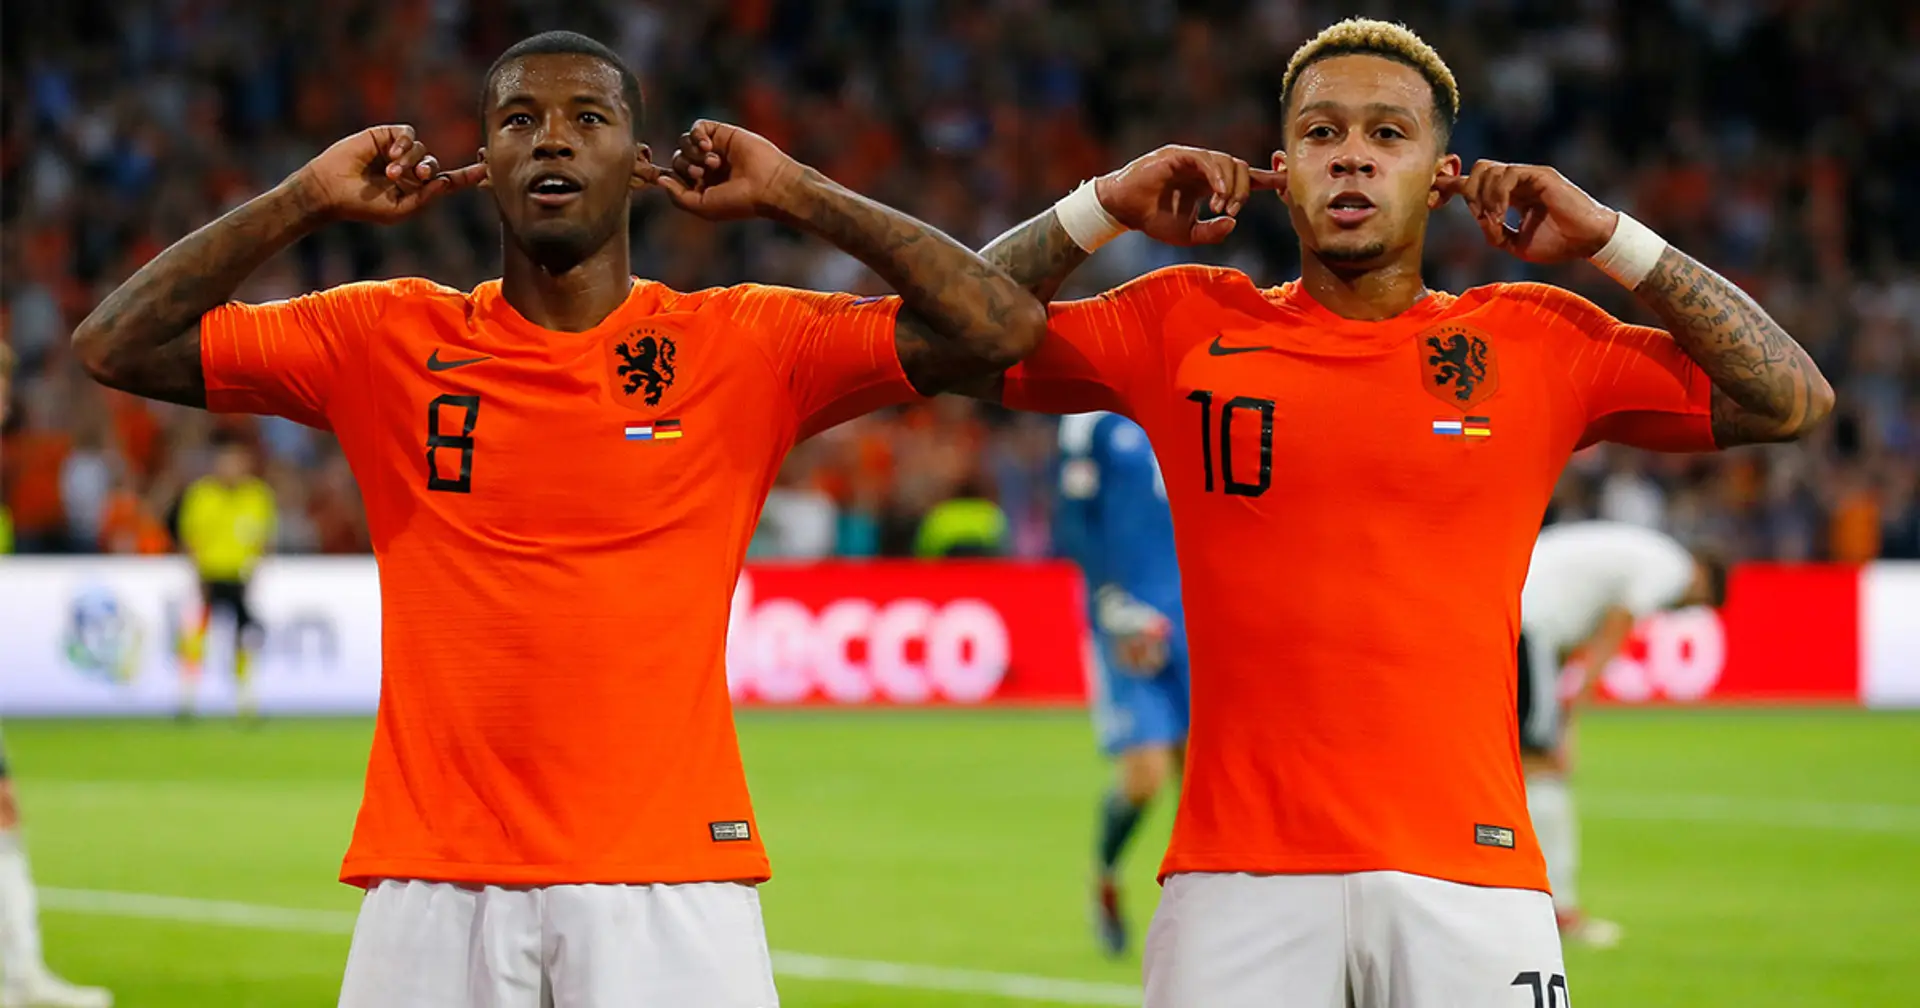 BOTH Depay and Wijnaldum 'close to signing for Barca' – top source